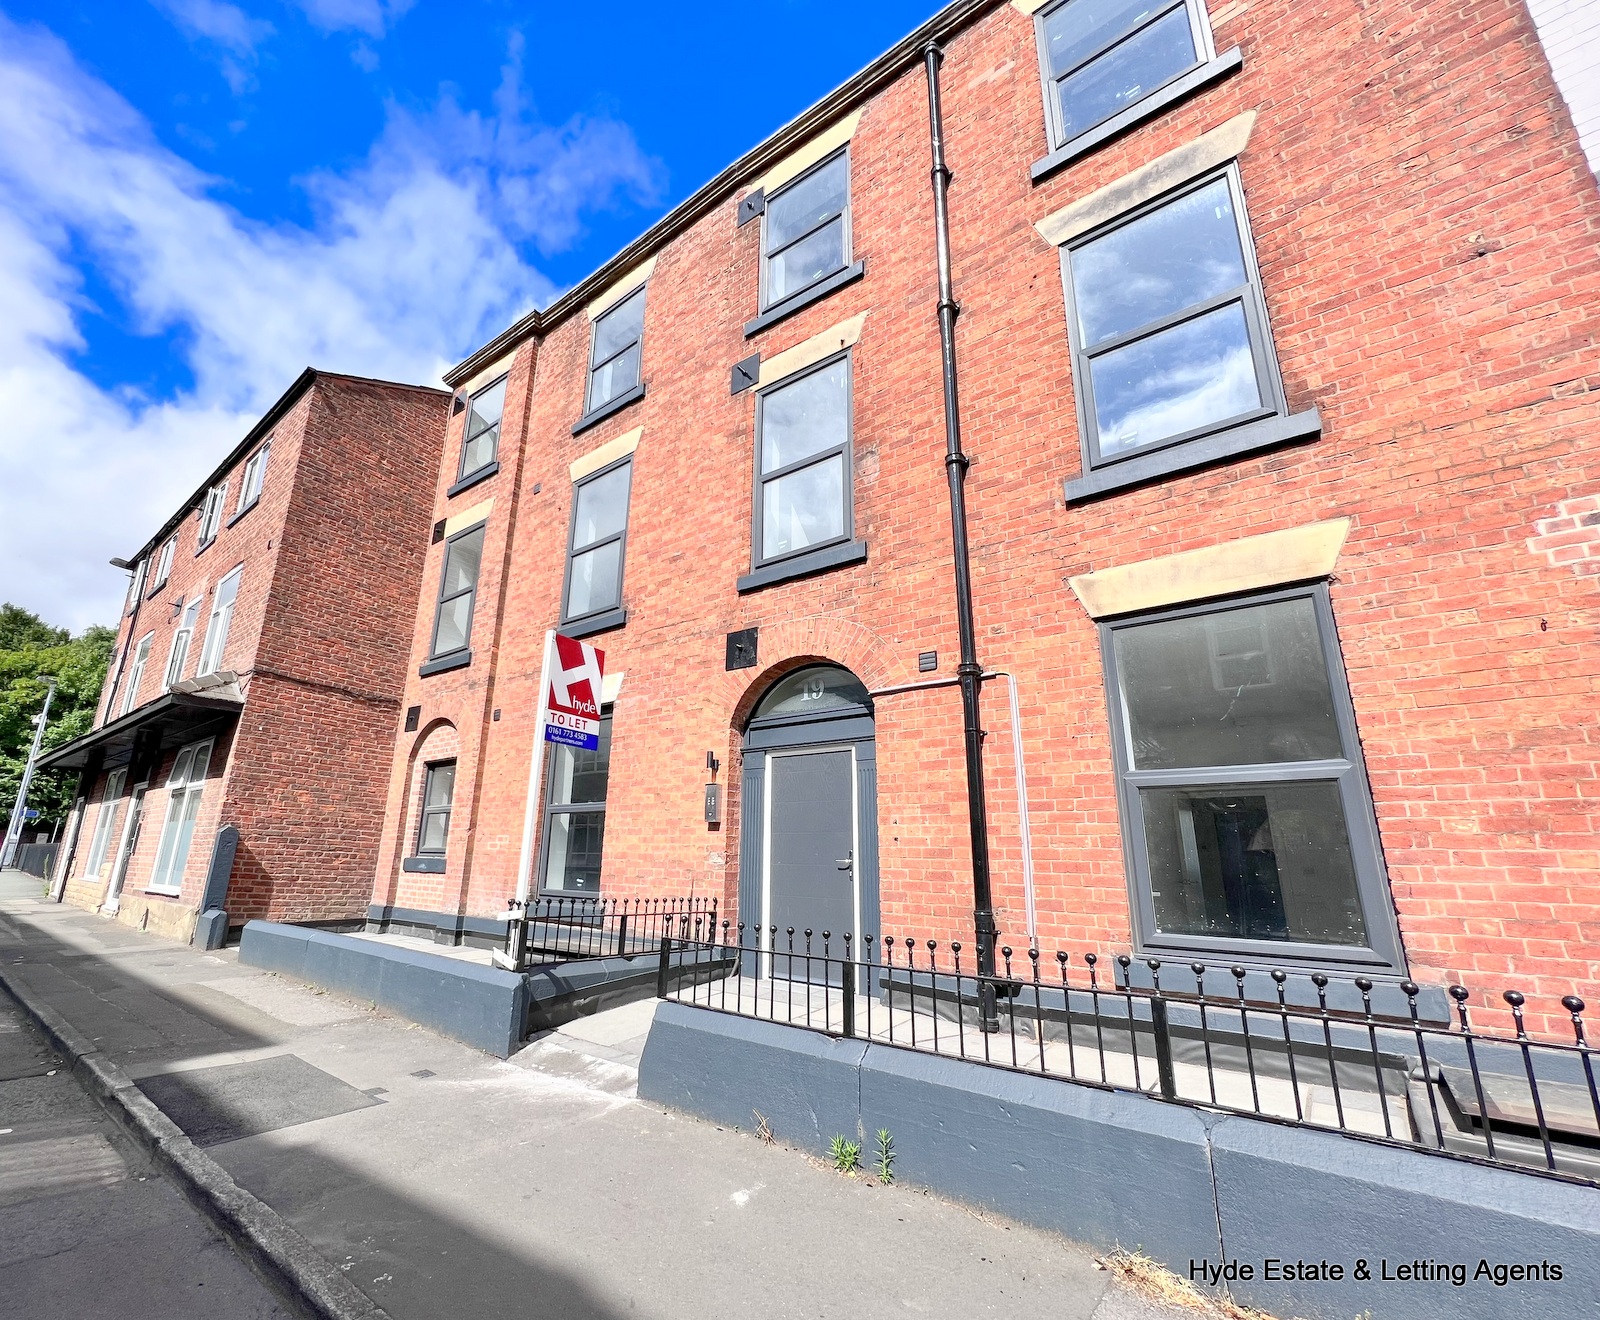 Images for Flat 3 Parsons Lane, Bury, BL9 0LY